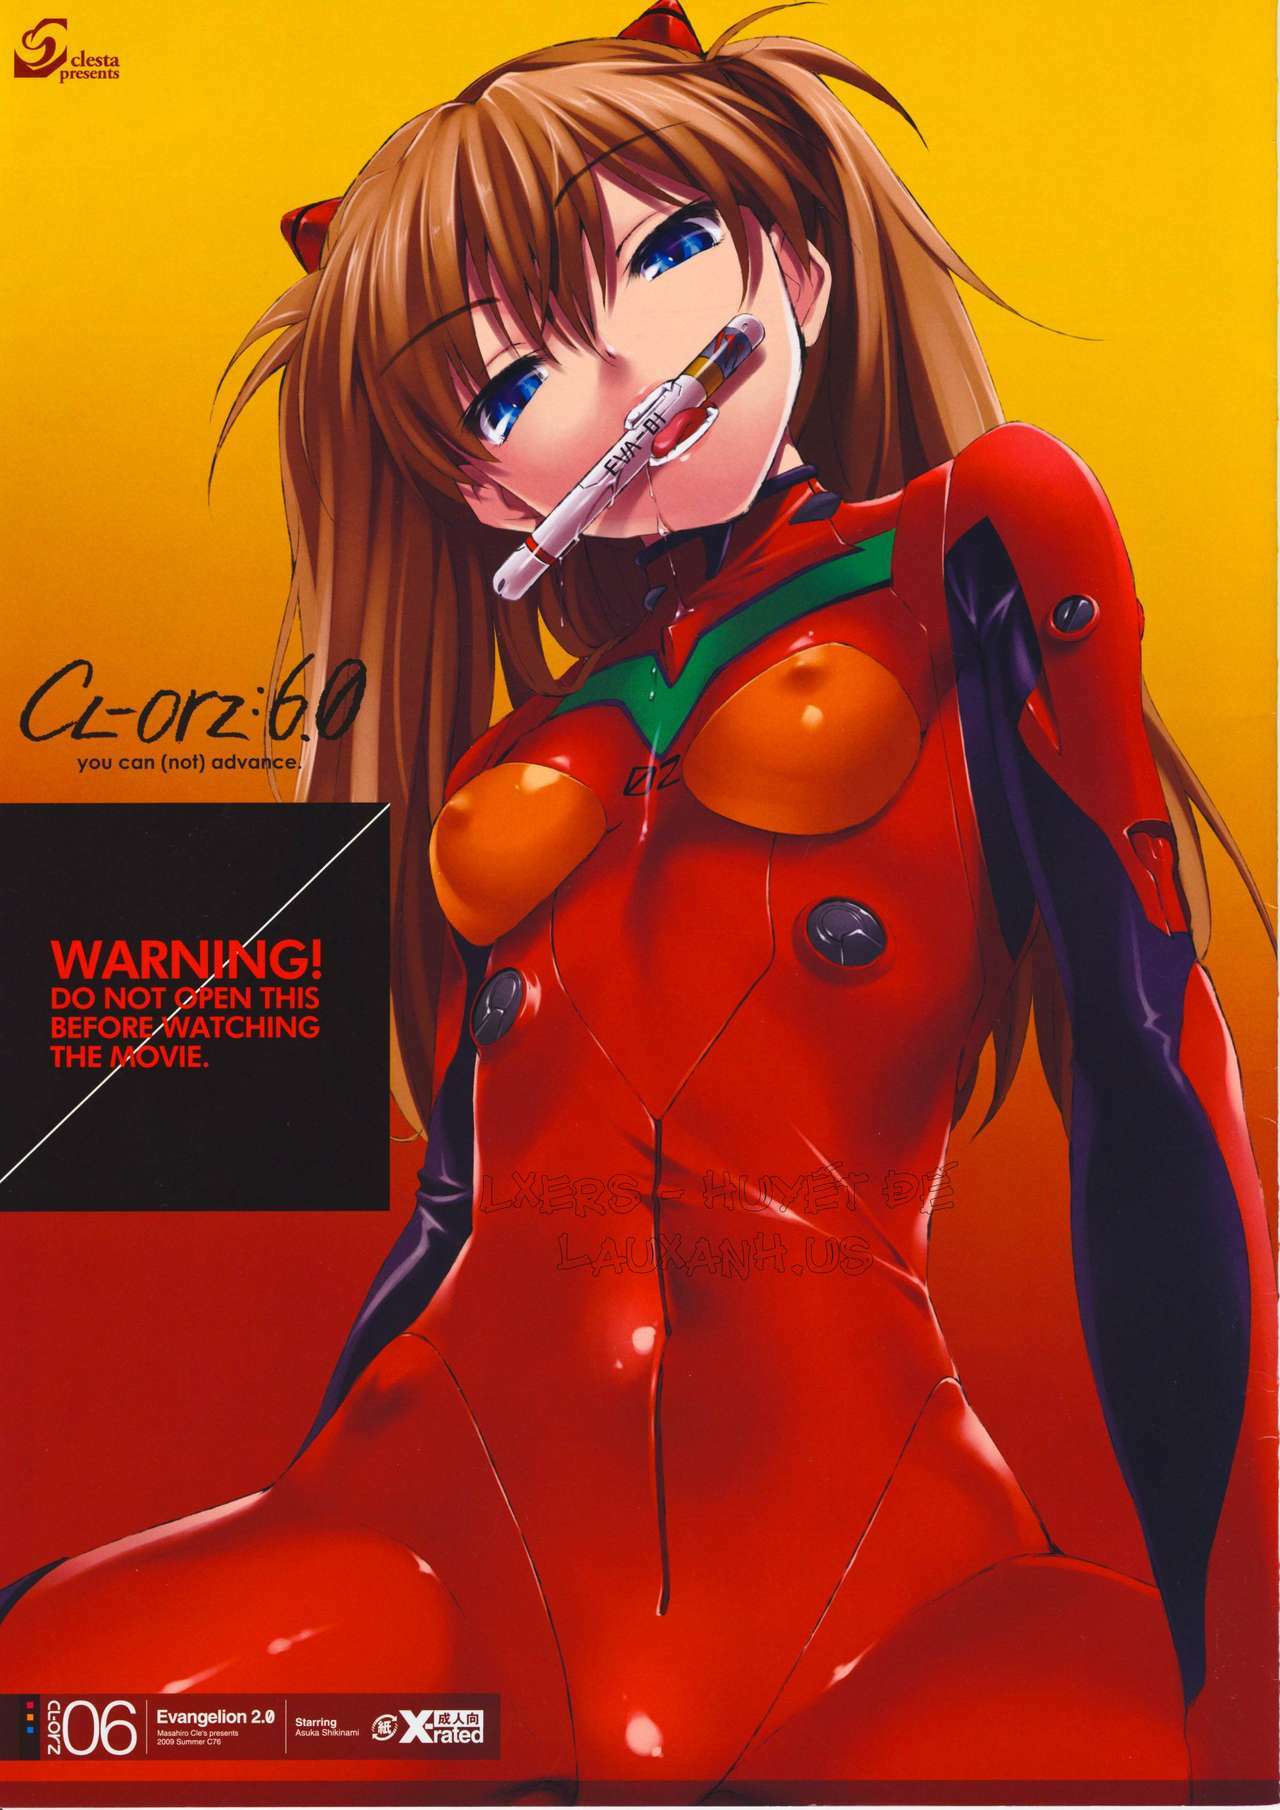 (C76) [Clesta (Cle Masahiro)] CL-orz:6.0 - you can (not) advance. (Rebuild of Evangelion) [Vietnamese Tiếng Việt] [Team LXERS] [Decensored] page 1 full